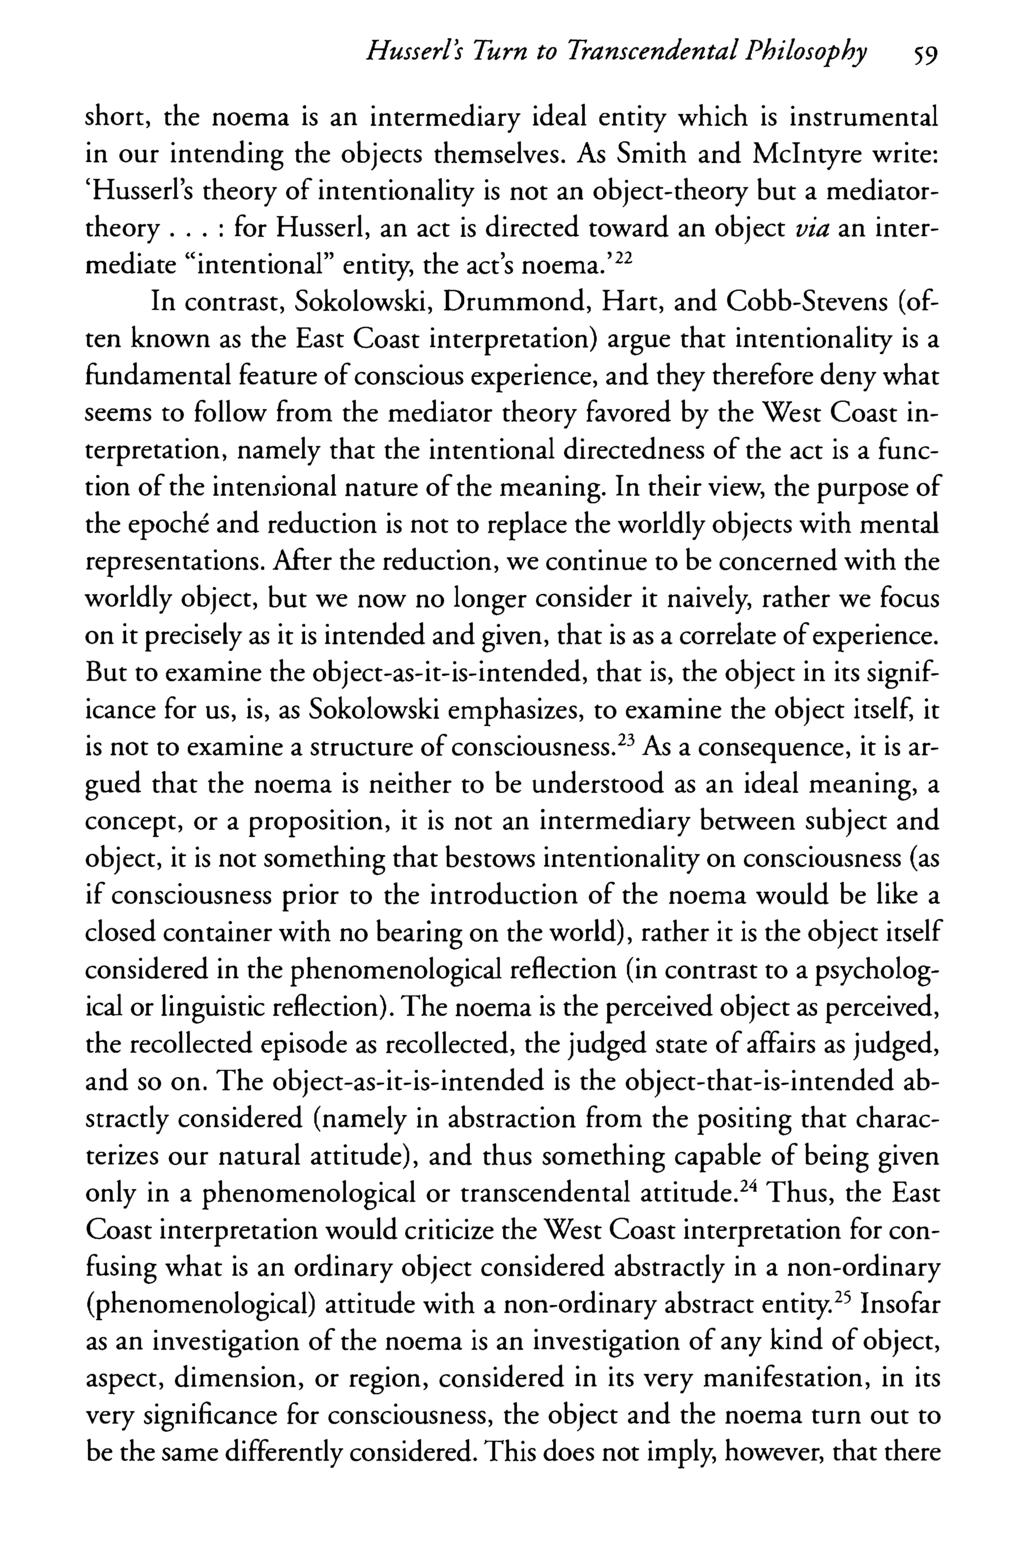 Husserls Turn to Transcendental Philosophy 59 short, the noema is an intermediary ideal entity which is instrumental in our intending the objects themselves.